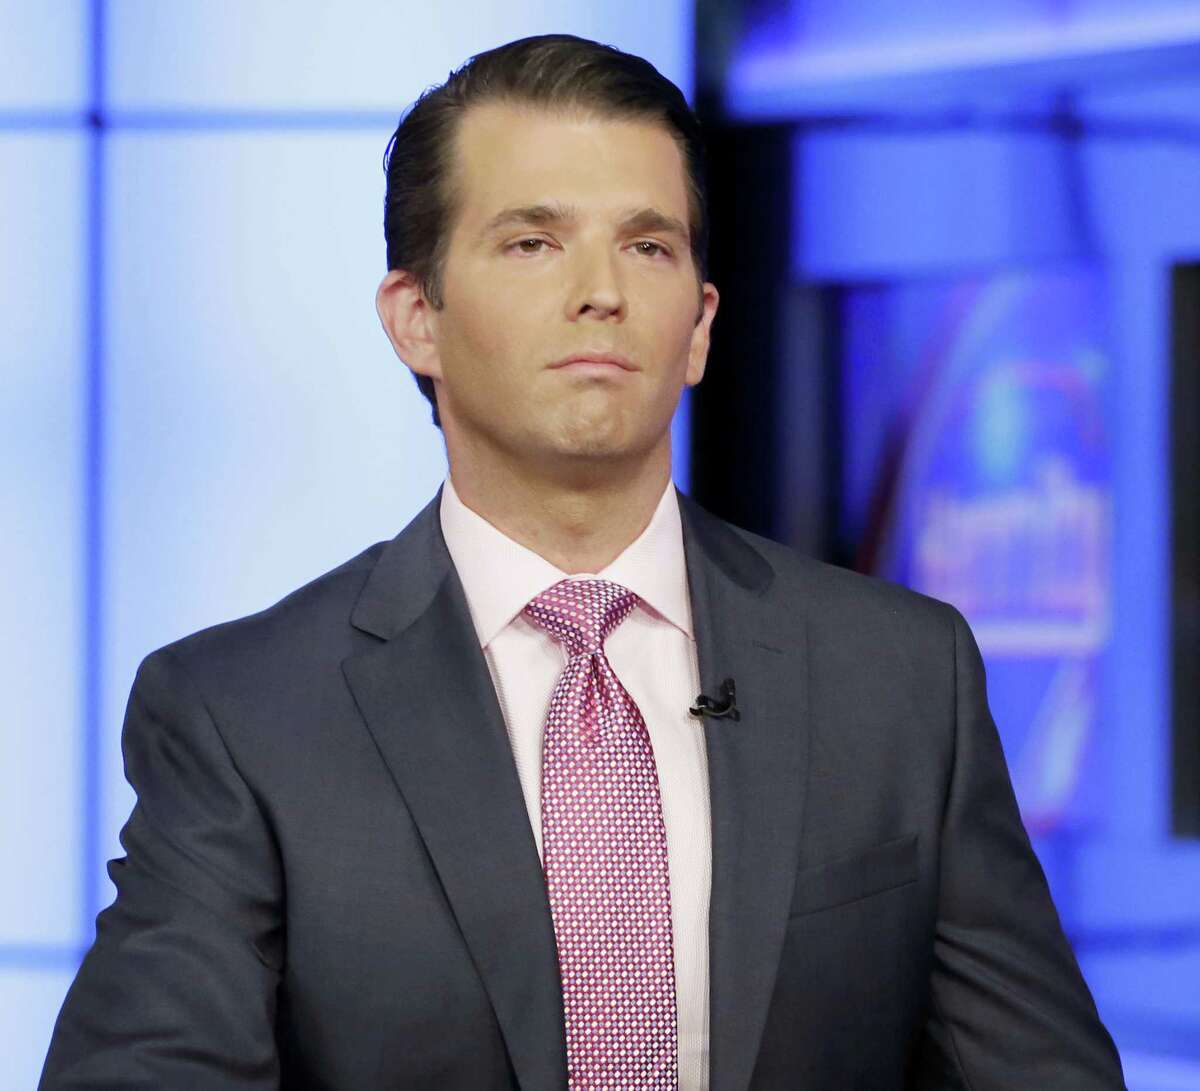 In this July 11, 2017, file photo, Donald Trump Jr. is interviewed by host Sean Hannity on his Fox News Channel television program, in New York. President Donald Trump’s eldest son and his former campaign chairman are agreeing to discuss being privately interviewed by a Senate committee investigating Russia’s meddling in the 2016 election.